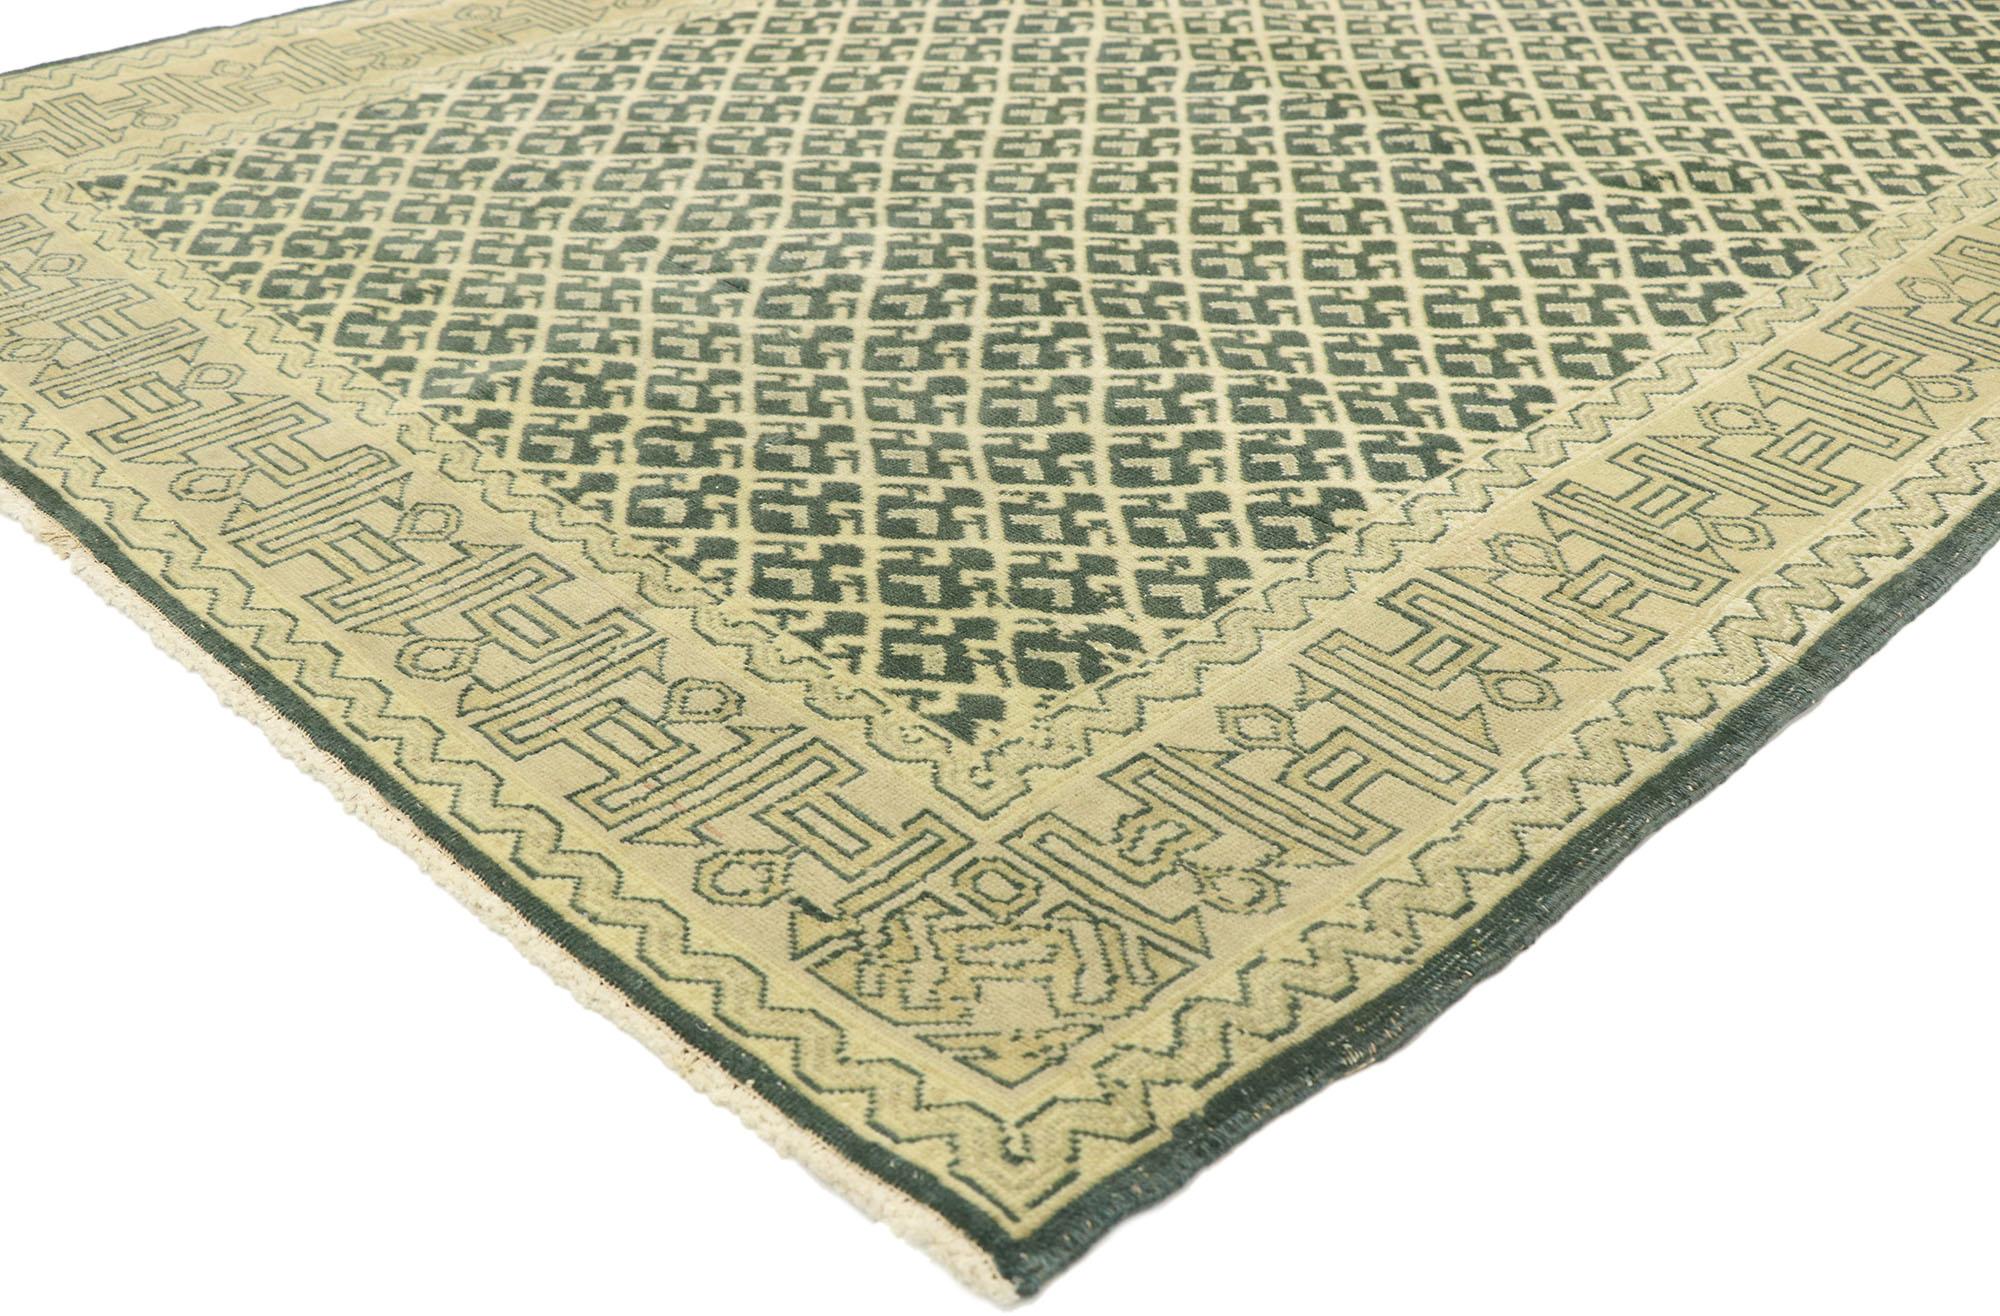 51269, Vintage Turkish Sivas Rug with Modernist Art Deco Style, Konya Inspired Rug 04'01 X 06'06. This hand knotted wool vintage Turkish Sivas rug features an all-over diaper pattern spread across a dark backdrop. This vintage Sivas rug closely